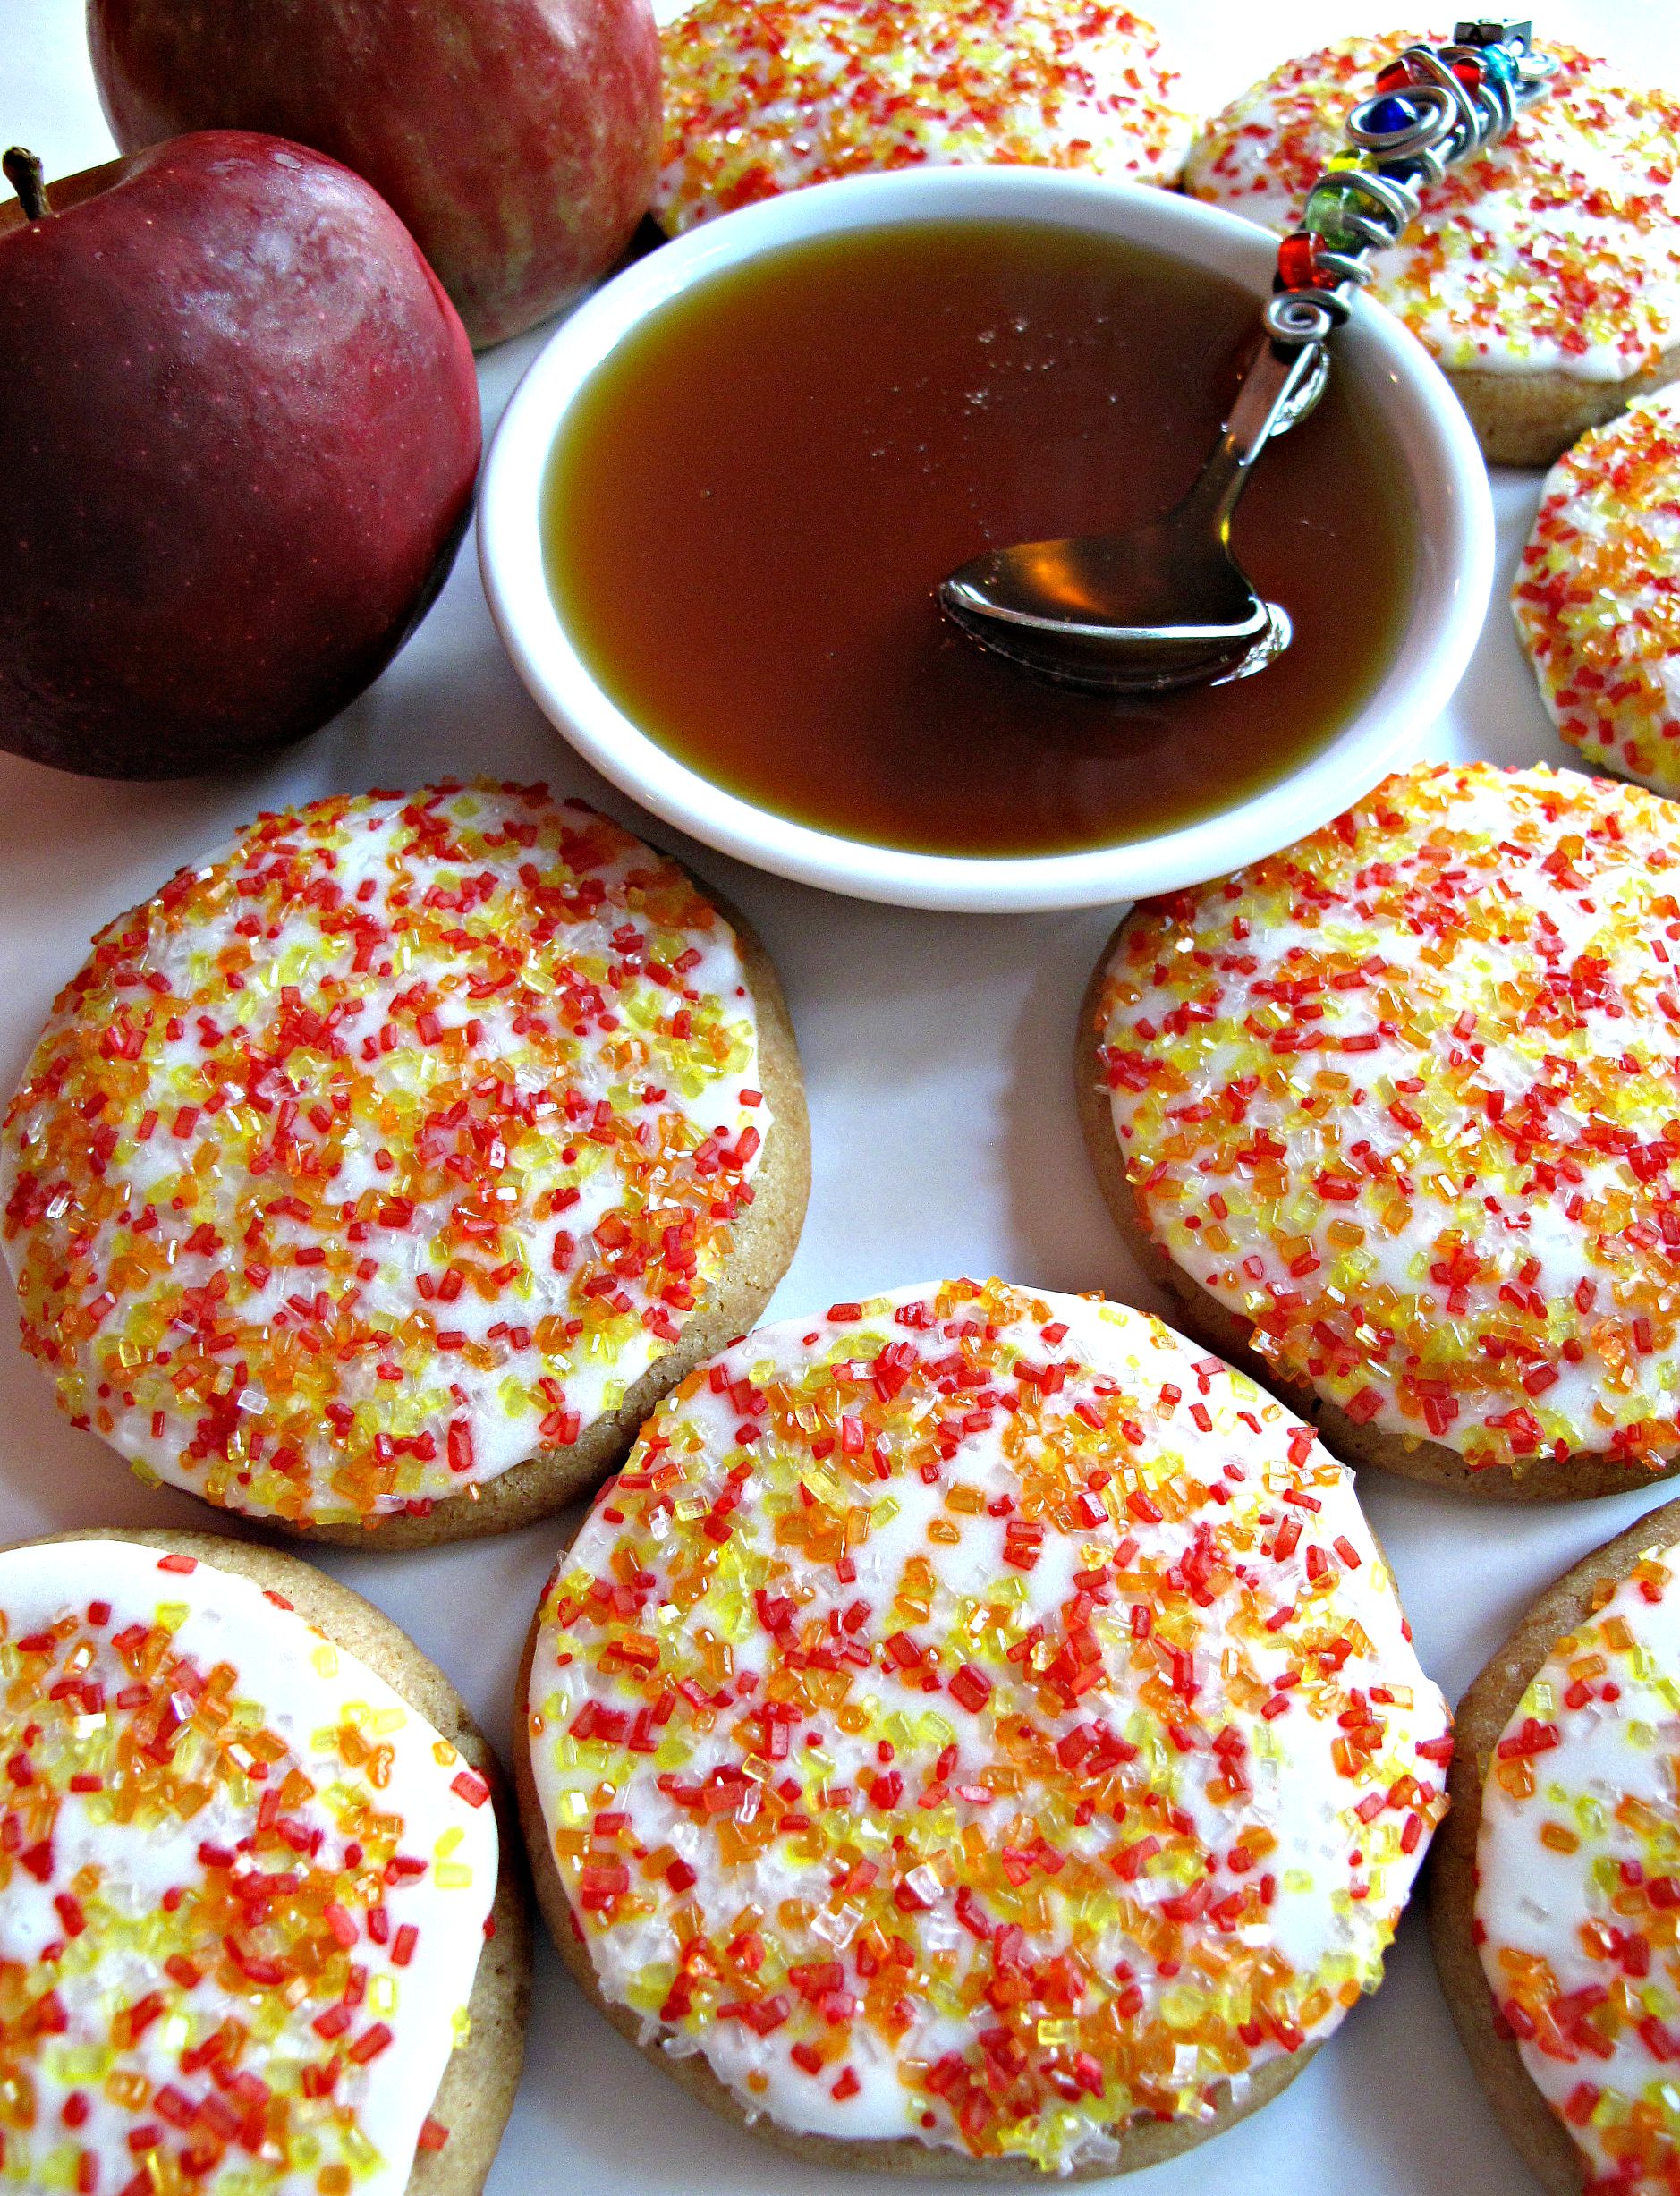 Apples and Honey Cookies